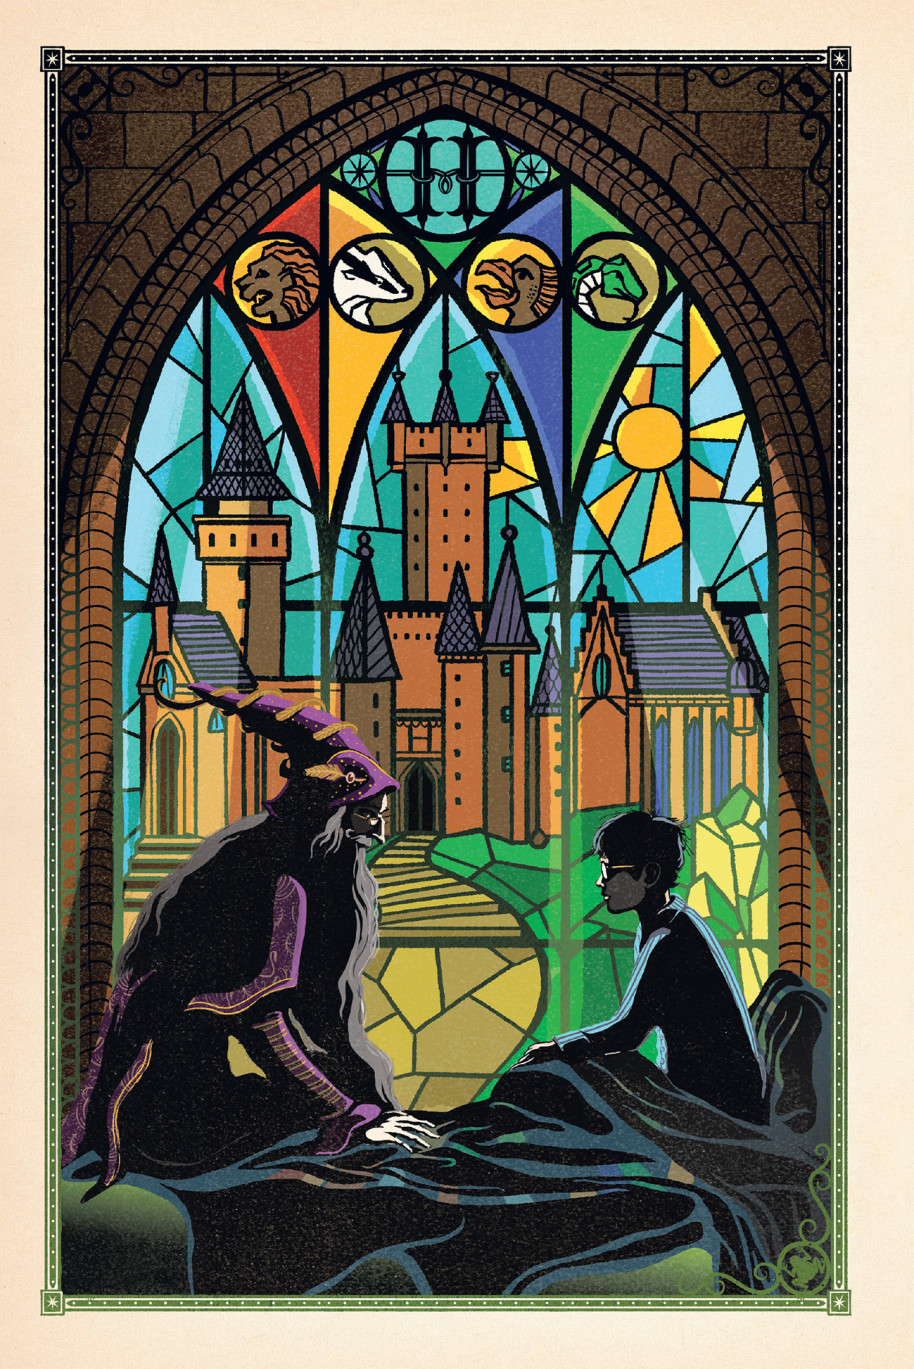 Take a look inside the new illustrated edition of Harry Potter and the